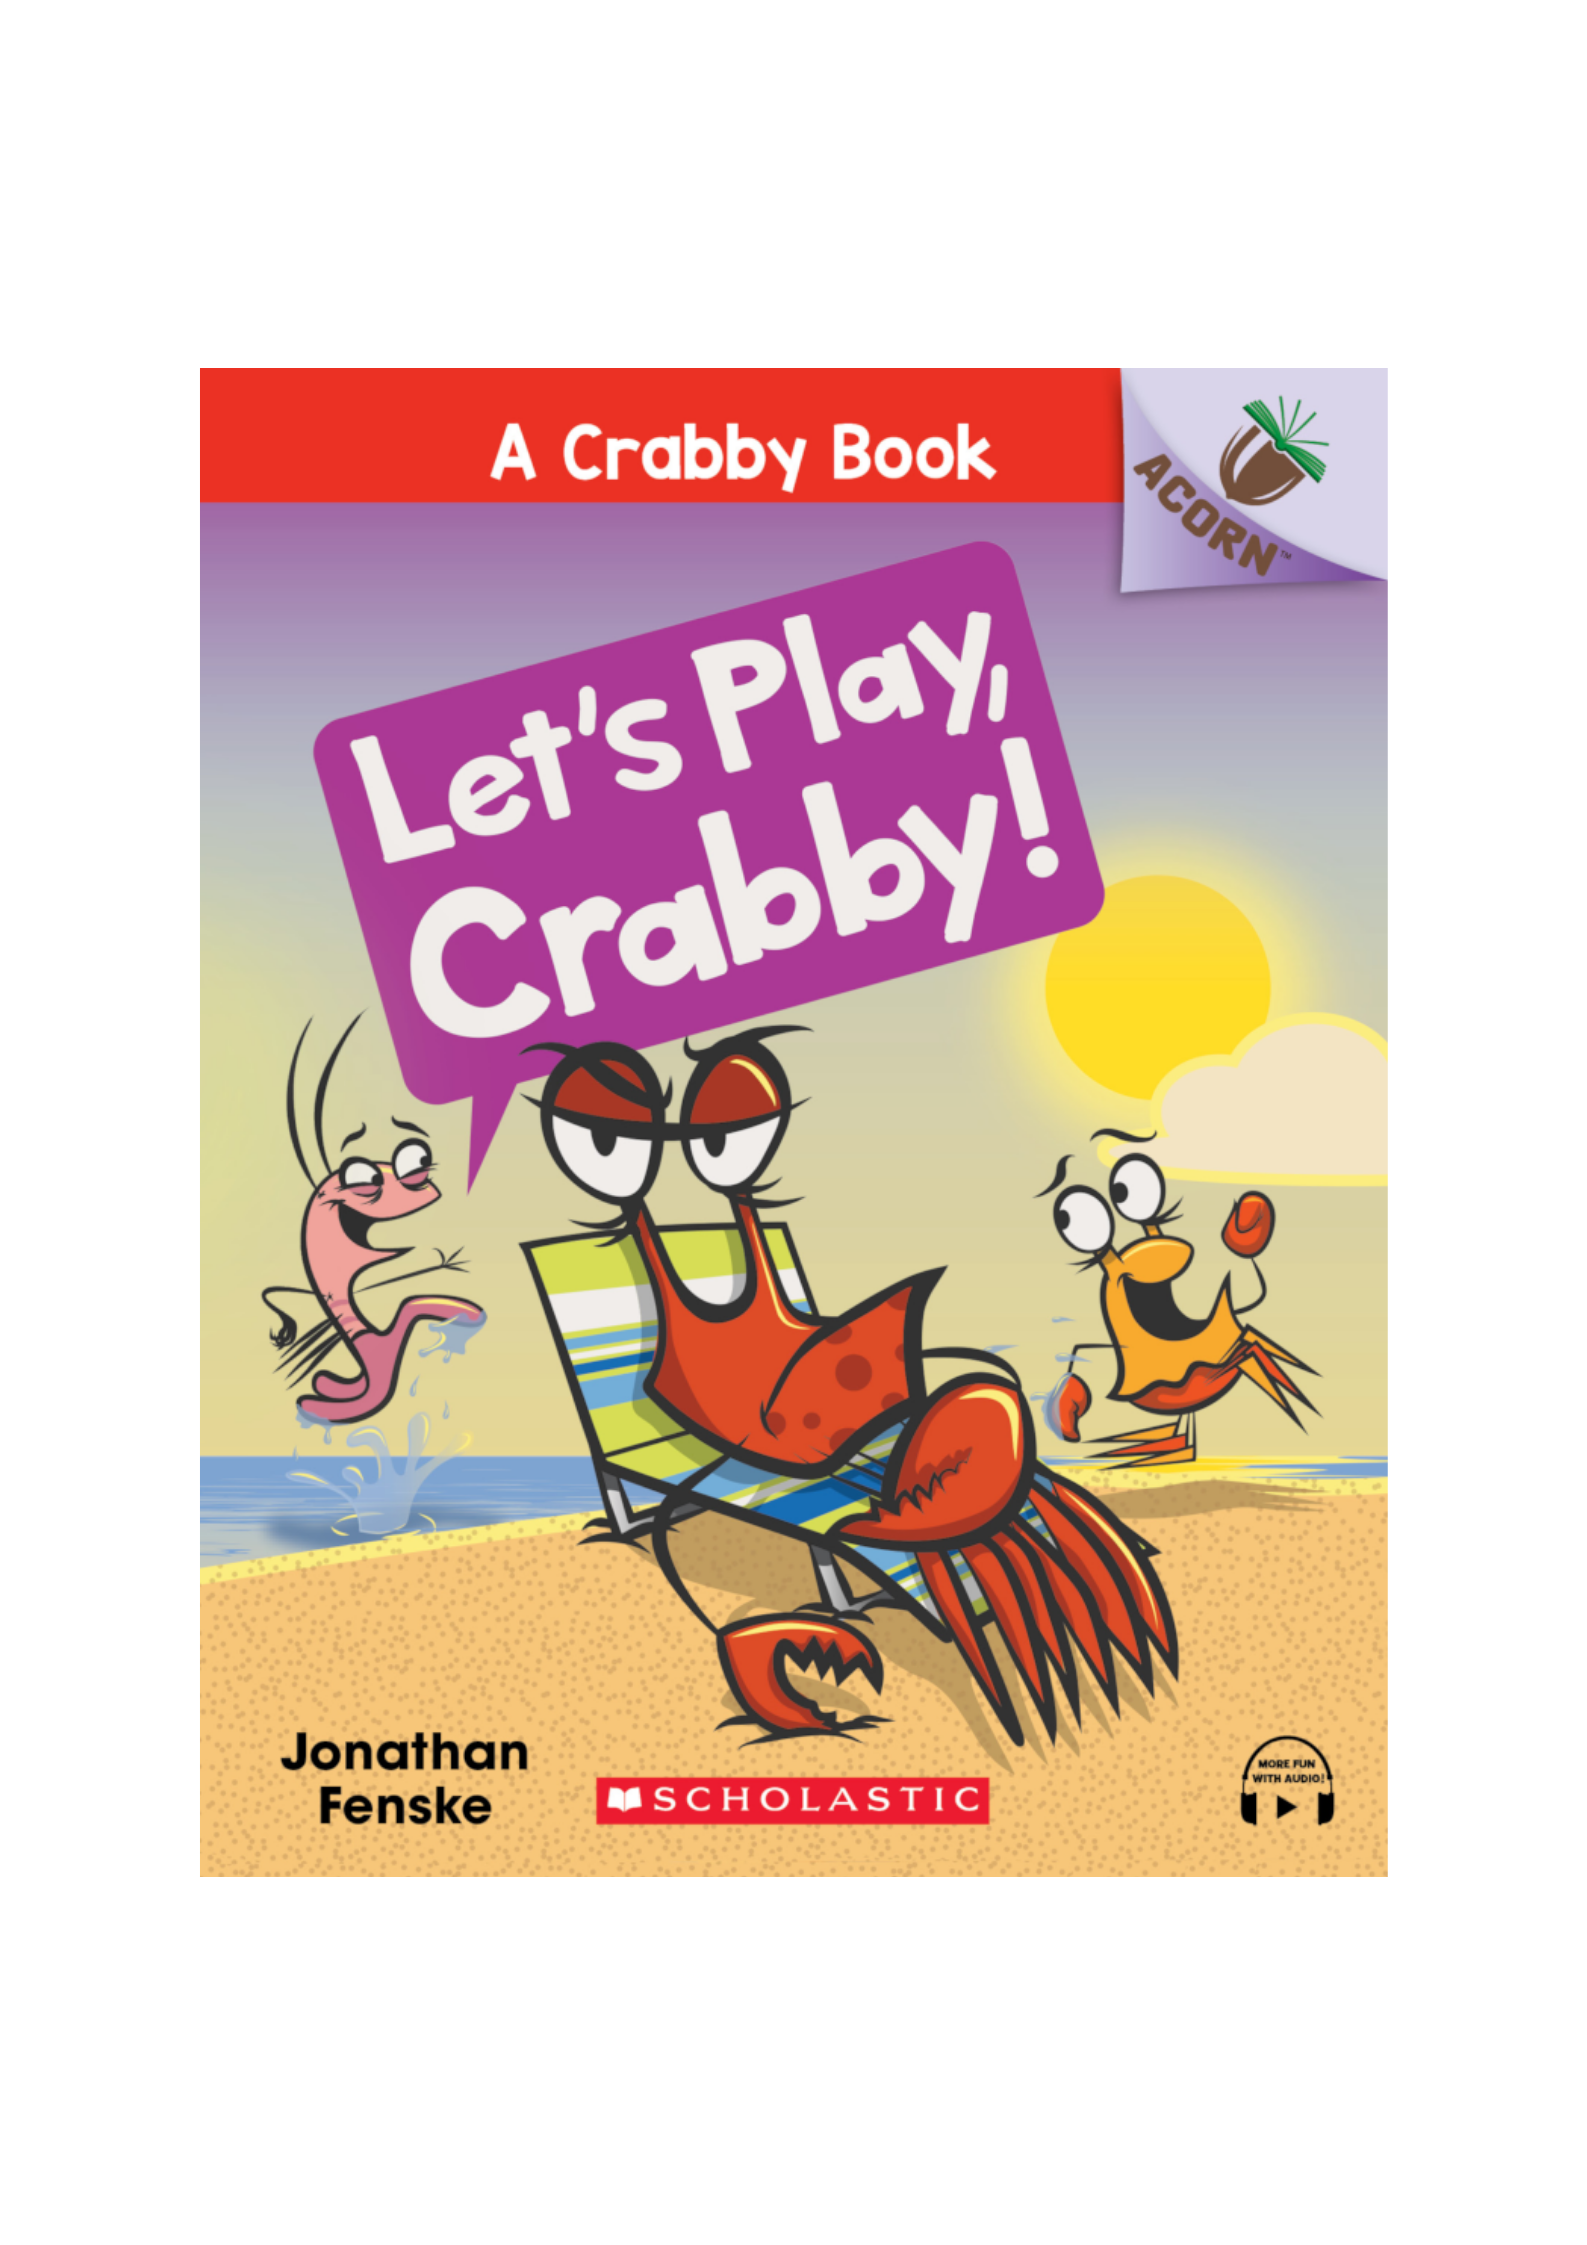 Acorn – A Crabby Book #2: Let’s Play, Crabby!